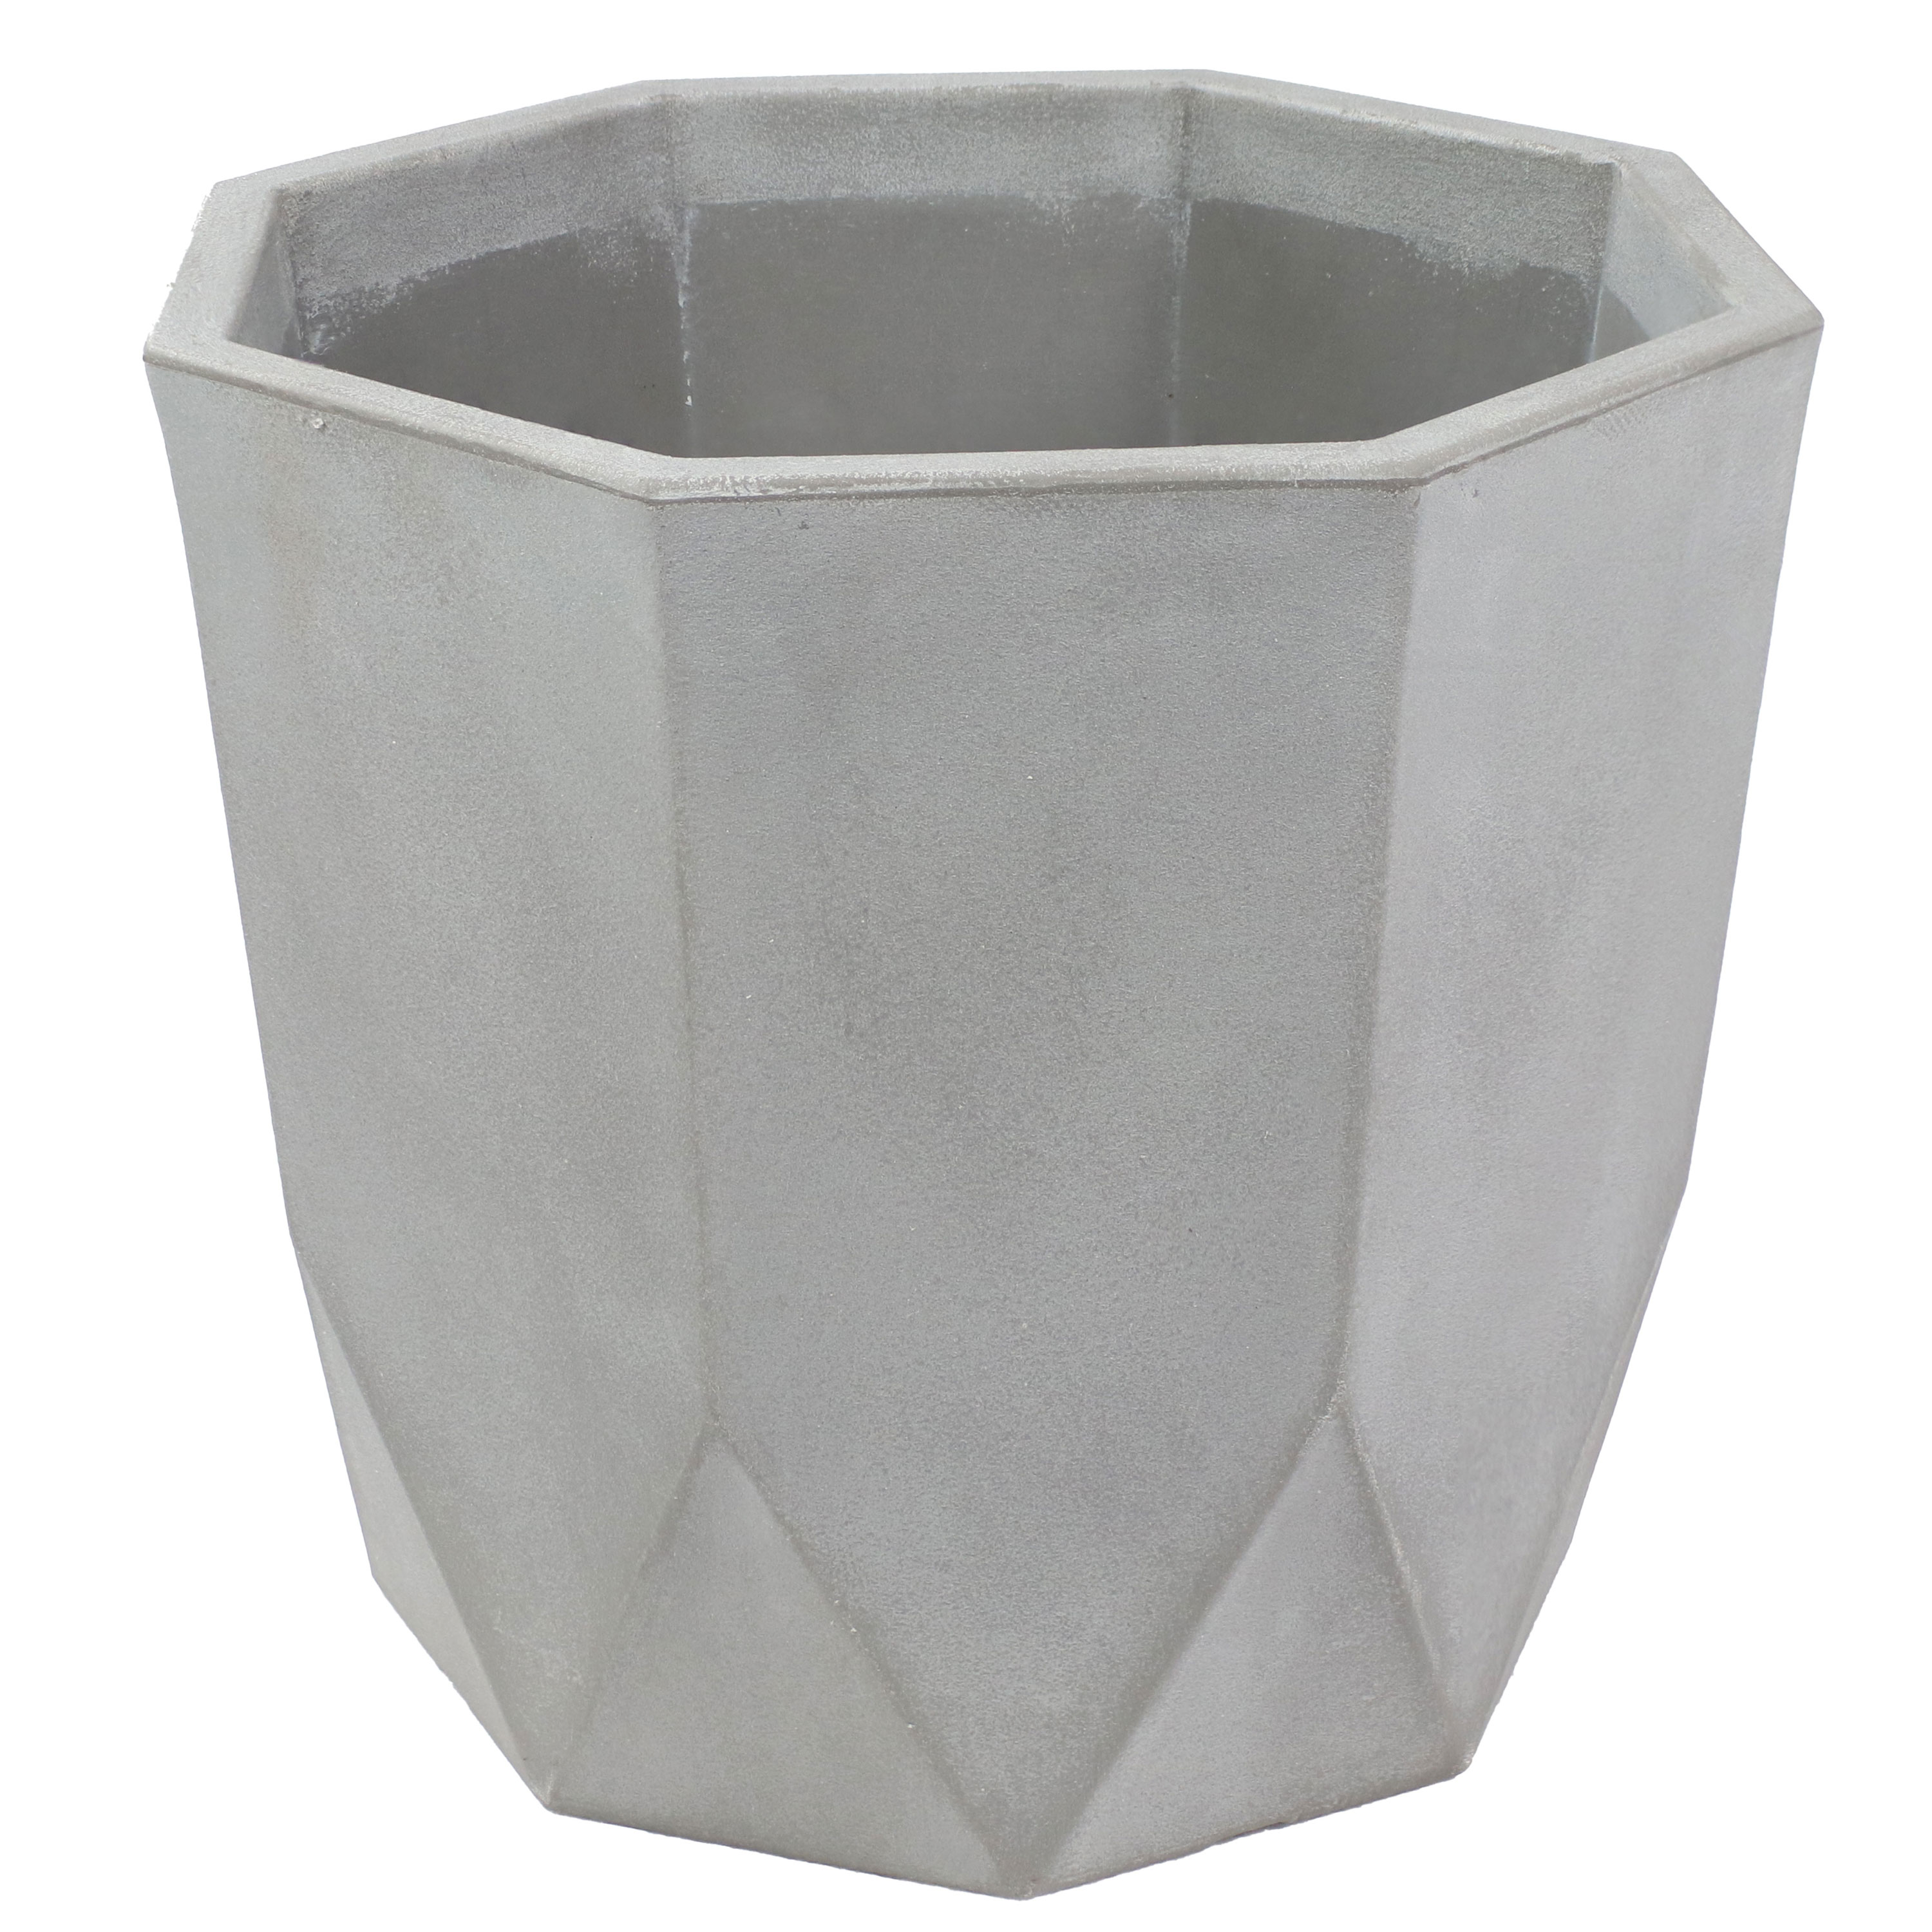 14.25 in Modern Faceted Outdoor Planter - Light Gray